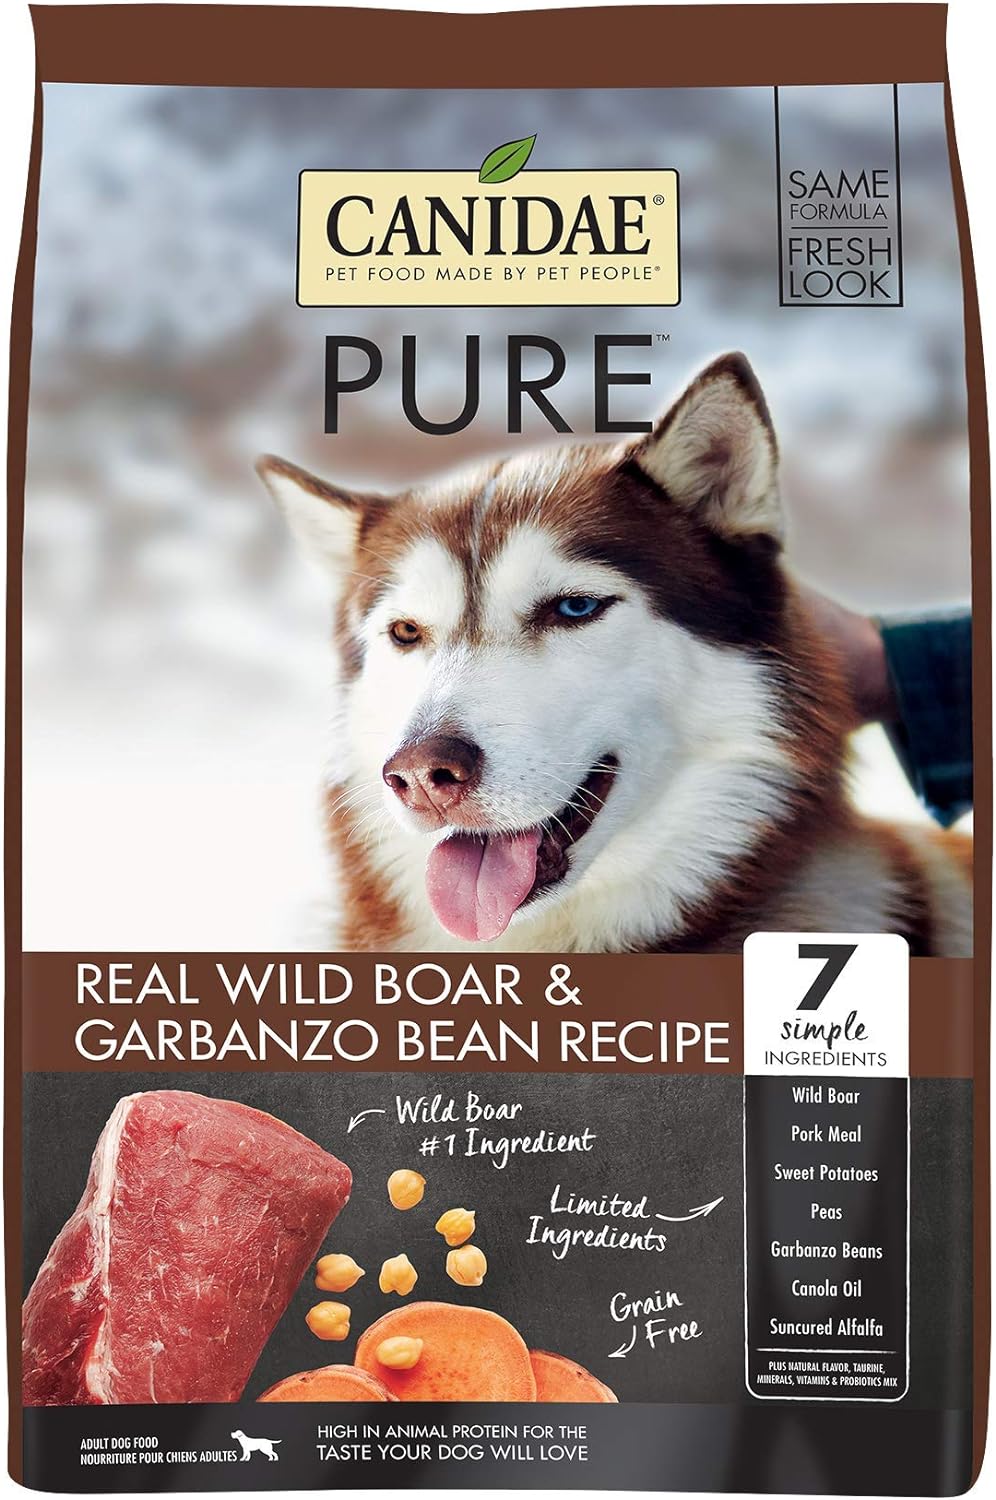 Canidae Pure Limited Ingredient Premium Adult Dry Dog Food, Real Wild Boar & Garbanzo Bean Recipe, 22 lbs, Grain Free